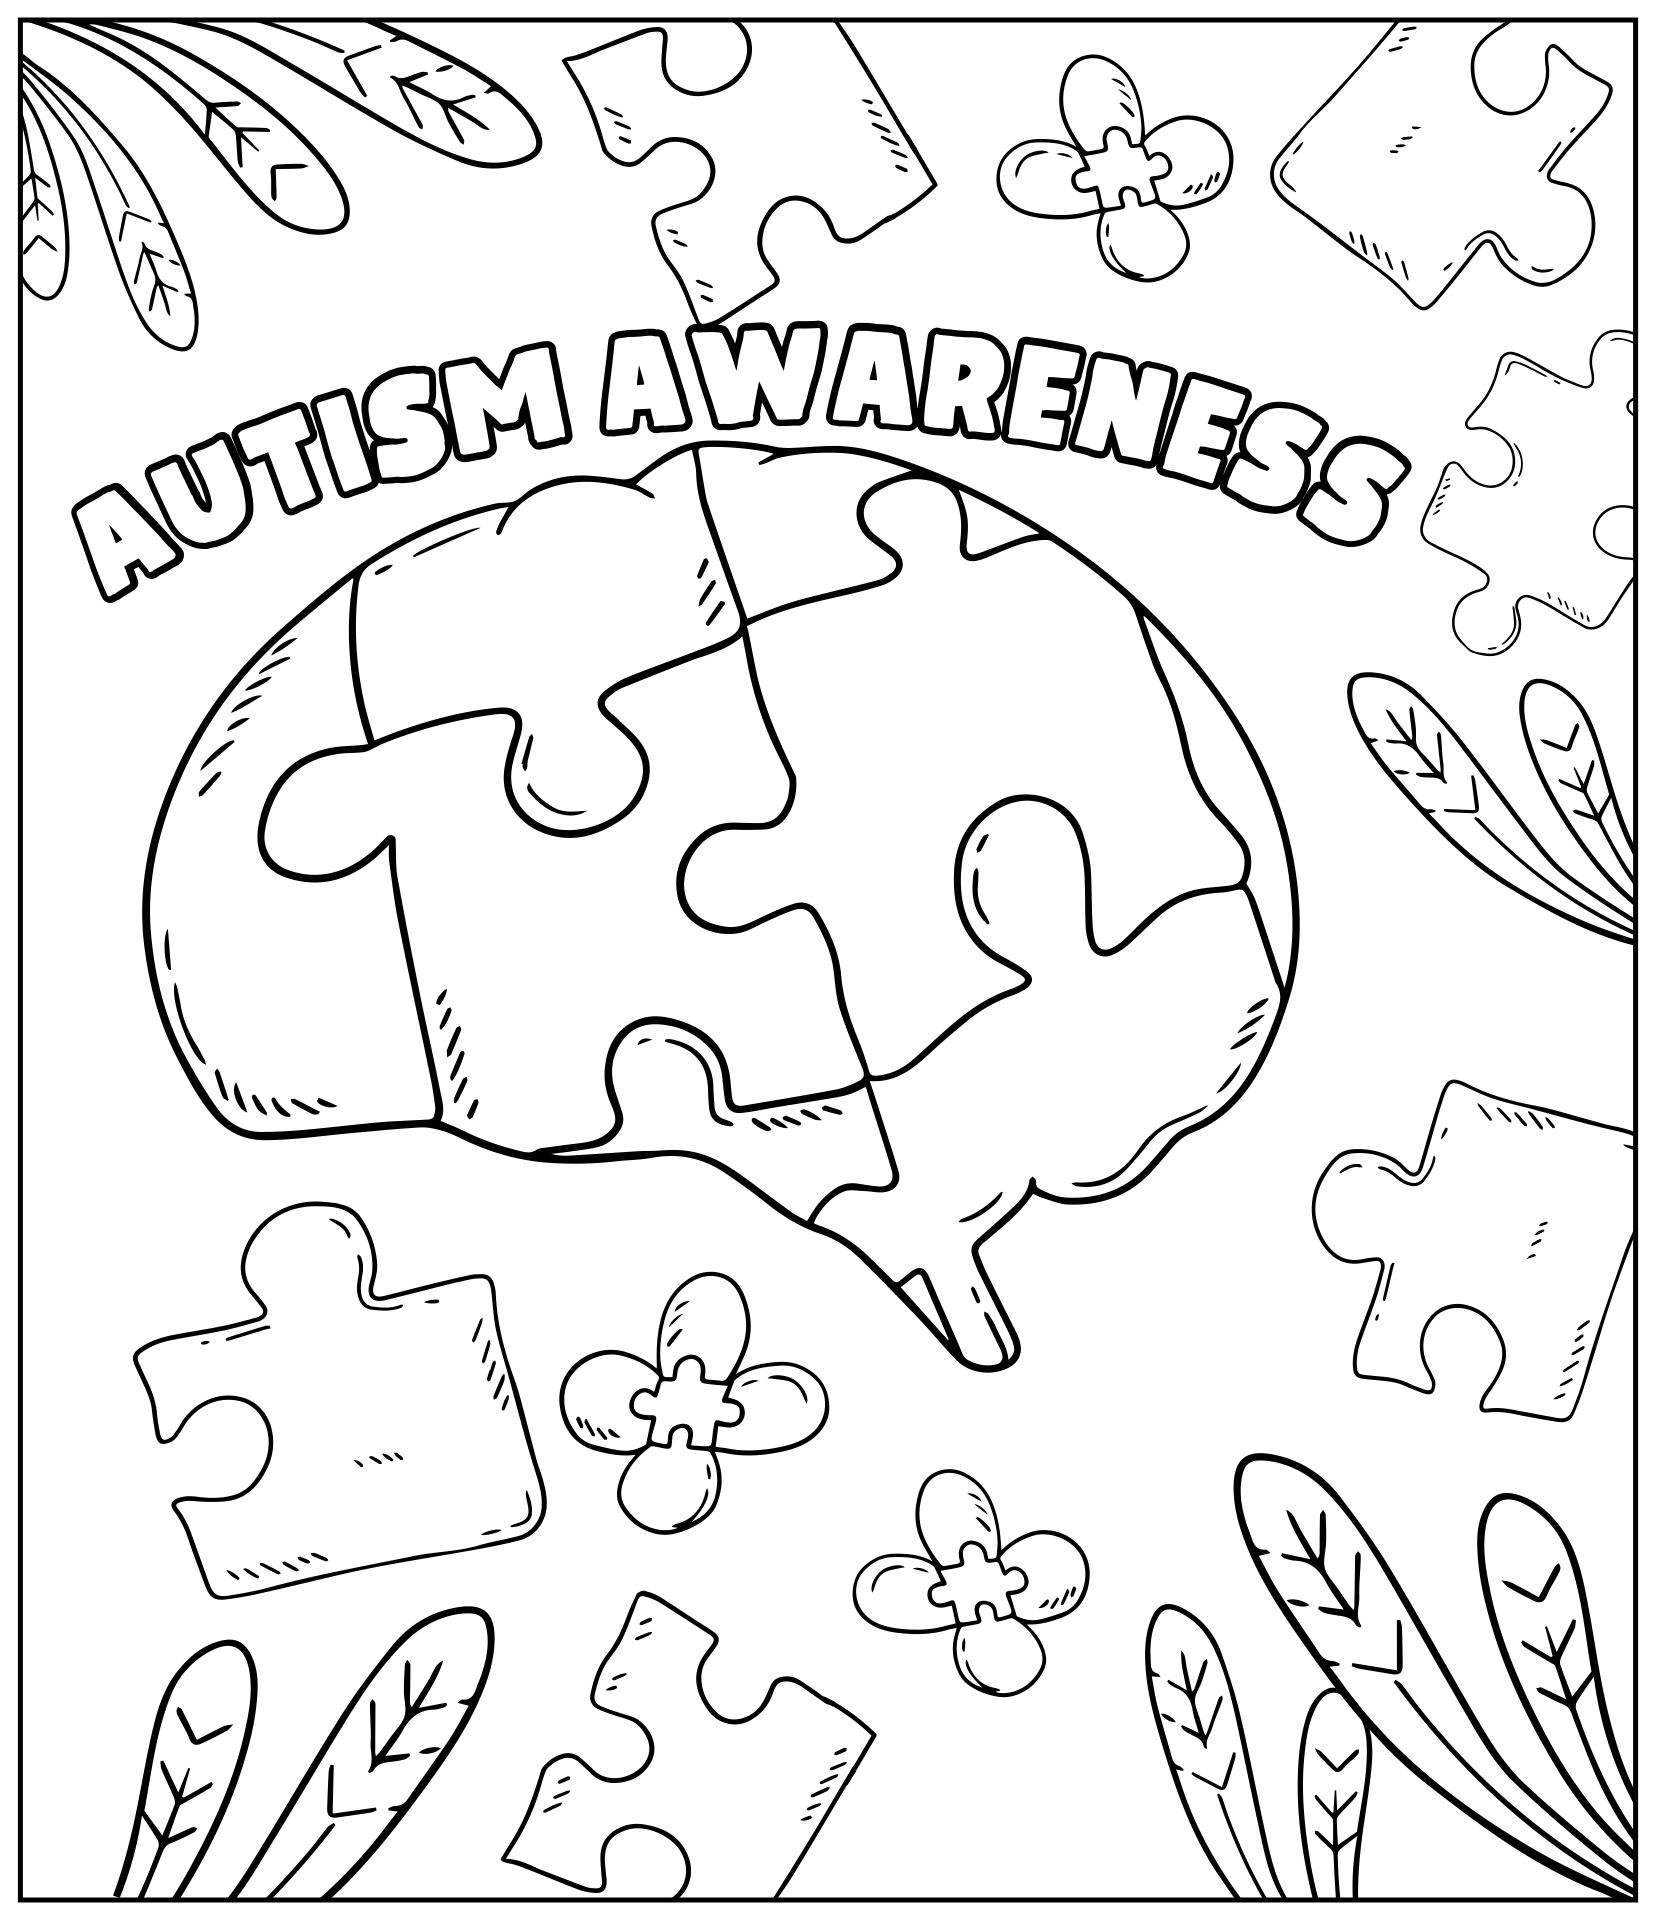 ASD Autism Spectrum Disorder Coloring Page